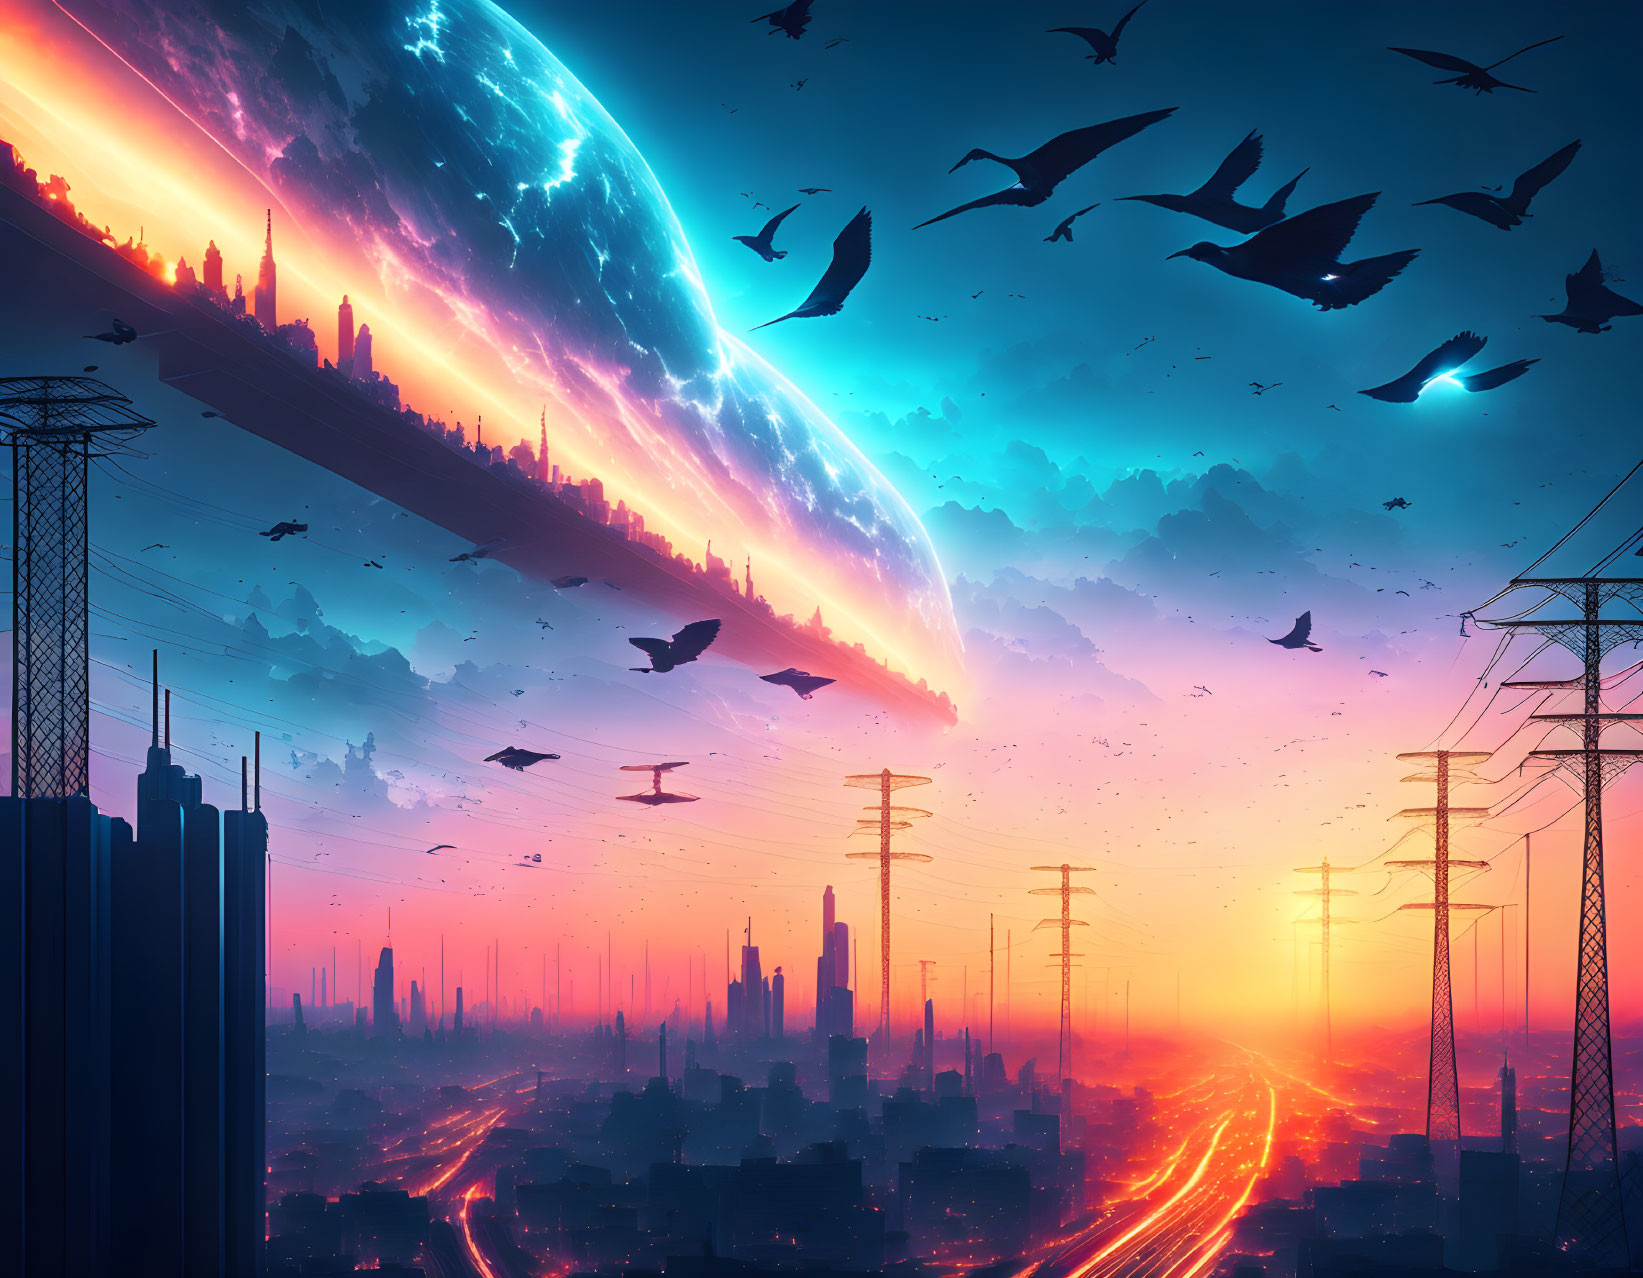 Futuristic cityscape at sunset with glowing roads and giant comet